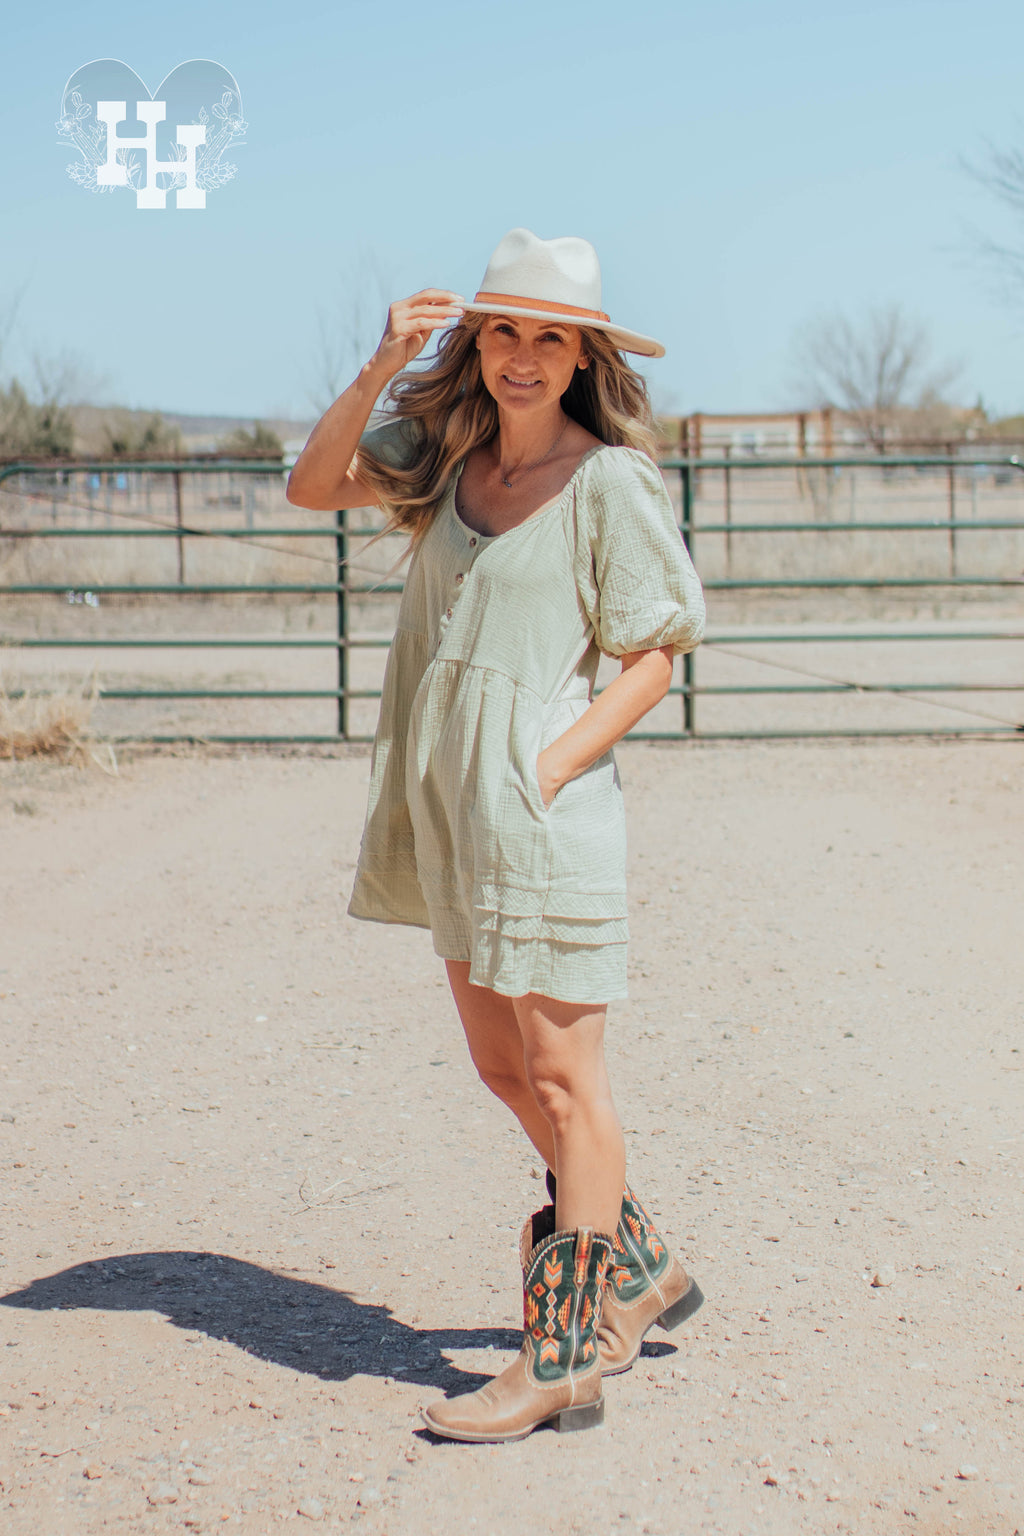 Girl standing in front of a gate on a ranch wearing a light green linen dress that is babydoll style with puff sleeves. She has her hand in the pocket of the dress.Length is about 3 inches above the knee. She is also wearing cowboy boots and a cream colored wide brim hat.